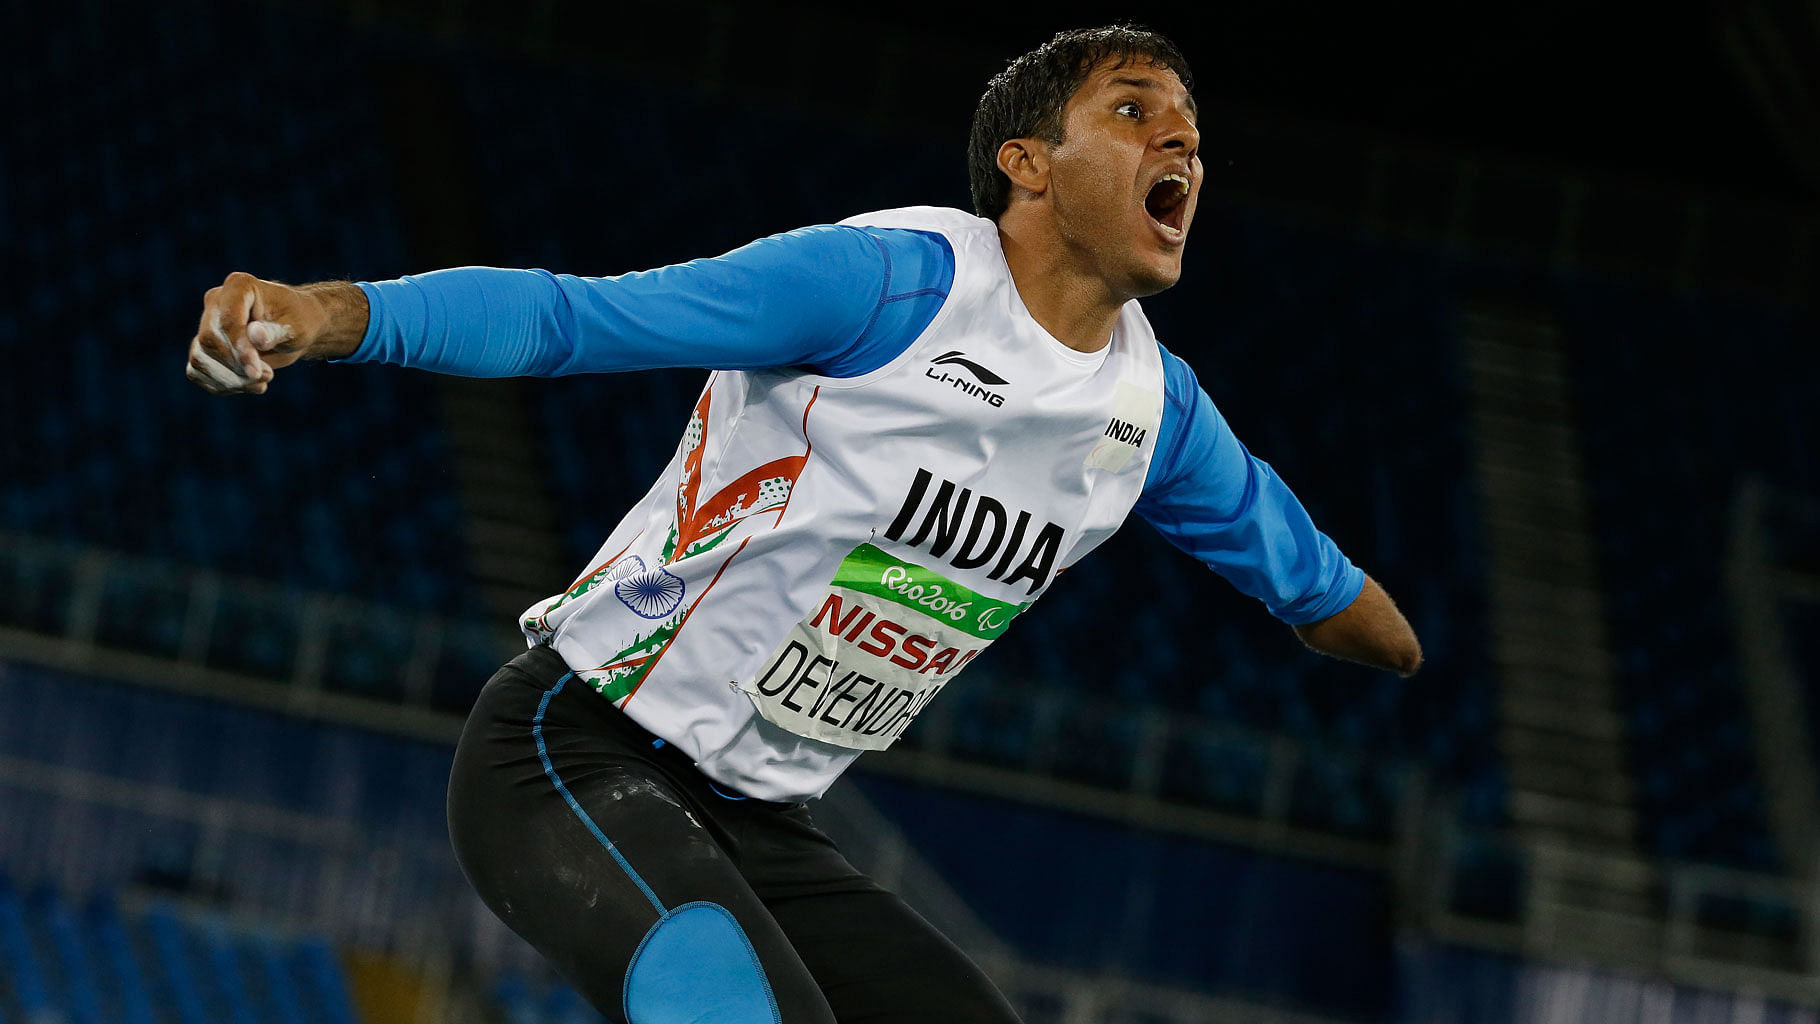 India’s Devendra Jhajharia reacts after his last throw in the men’s javelin throw F46 final of the Paralympic Games in Rio de Janeiro. (Photo: AP)